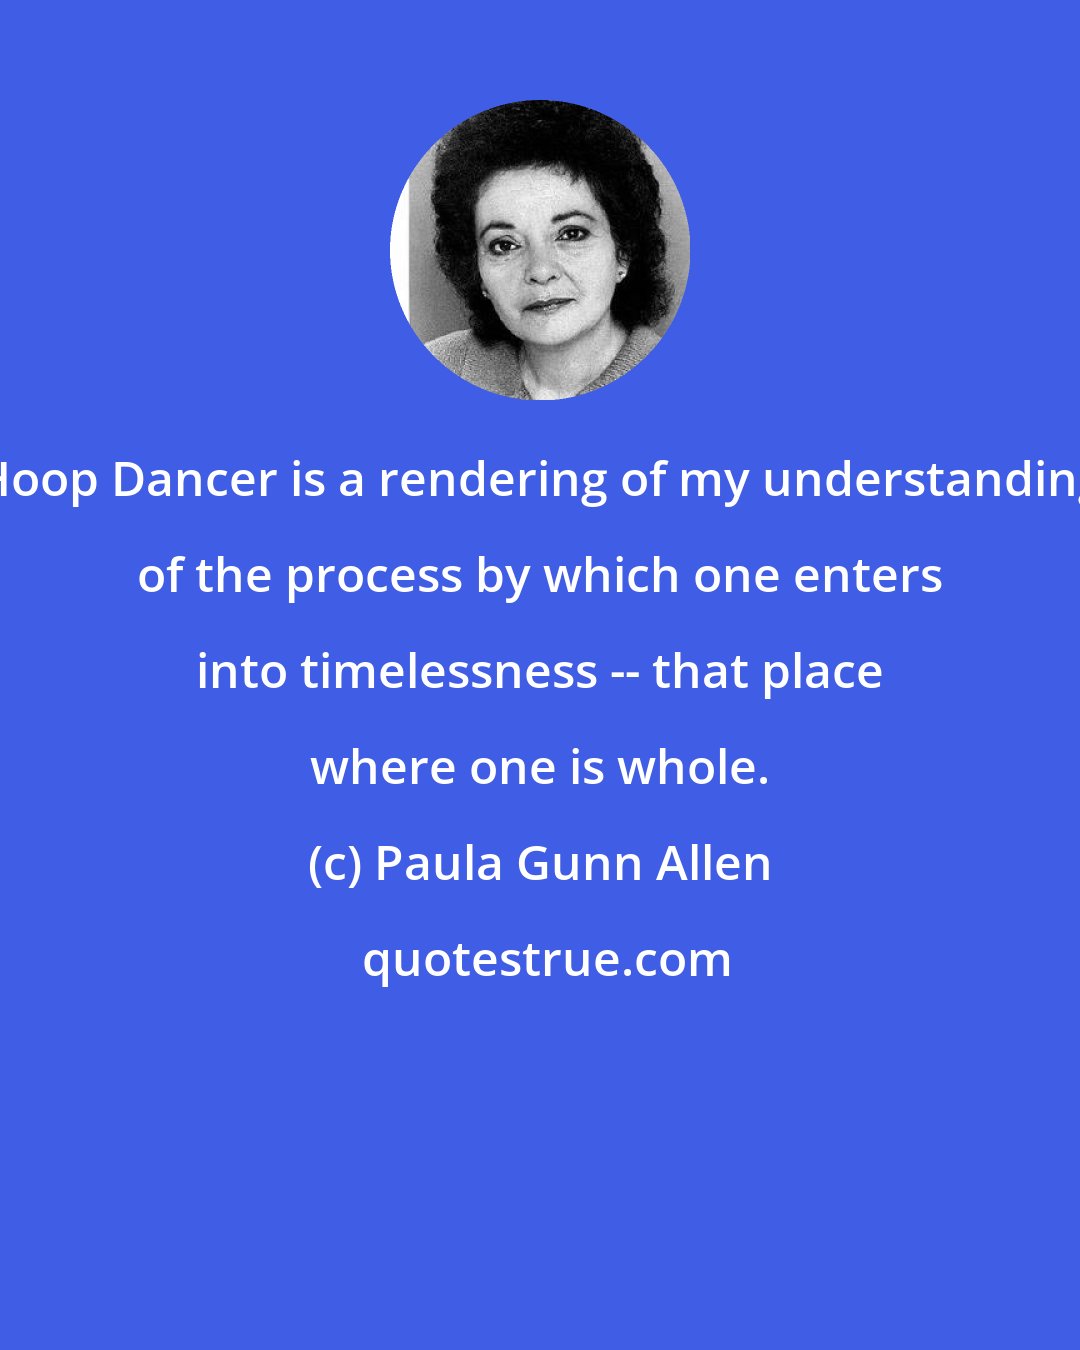 Paula Gunn Allen: Hoop Dancer is a rendering of my understanding of the process by which one enters into timelessness -- that place where one is whole.